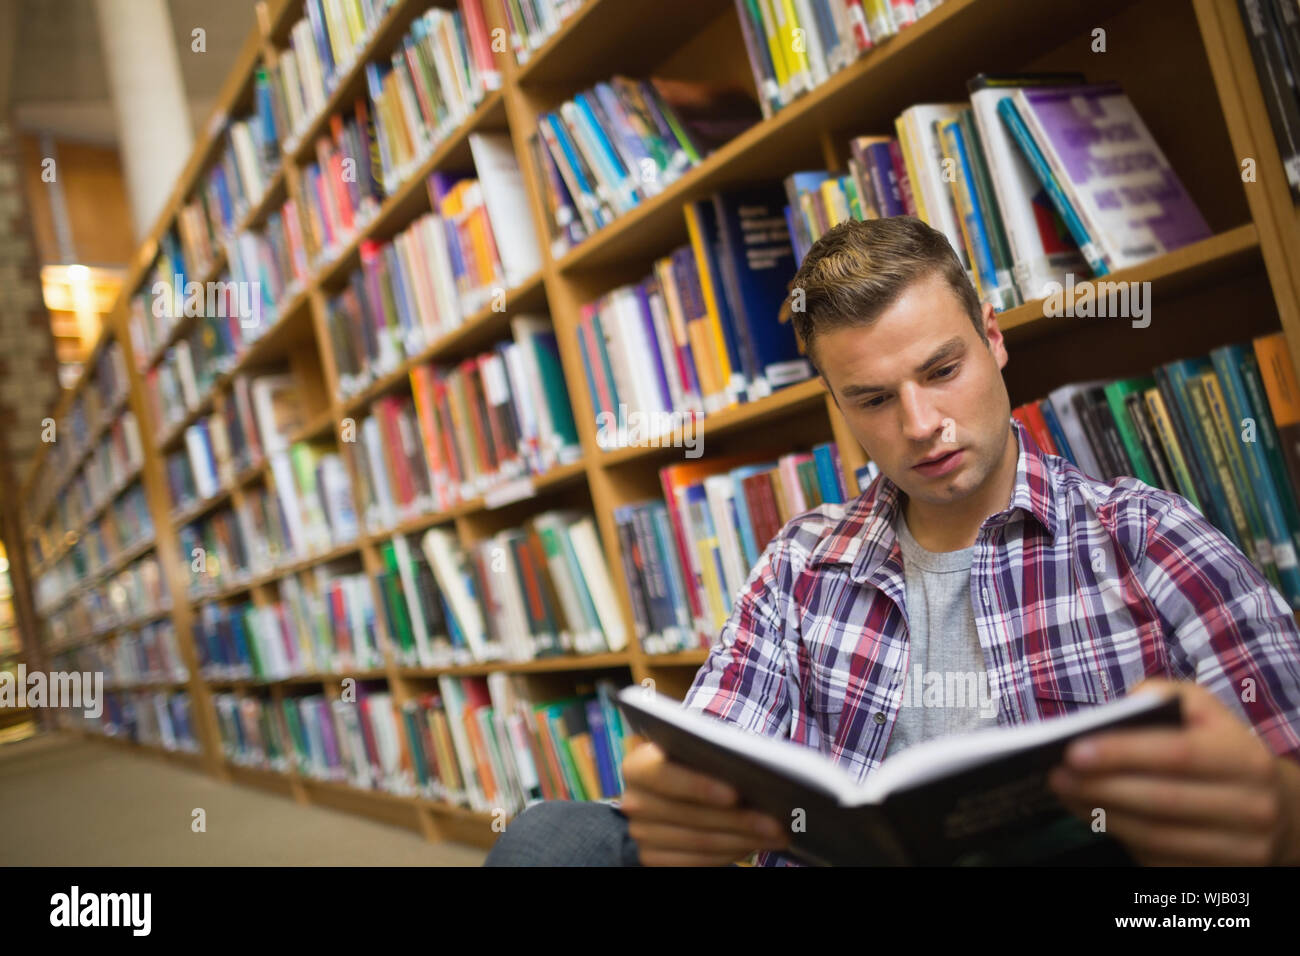 Focused young student sitting on library floor reading book Stock Photo